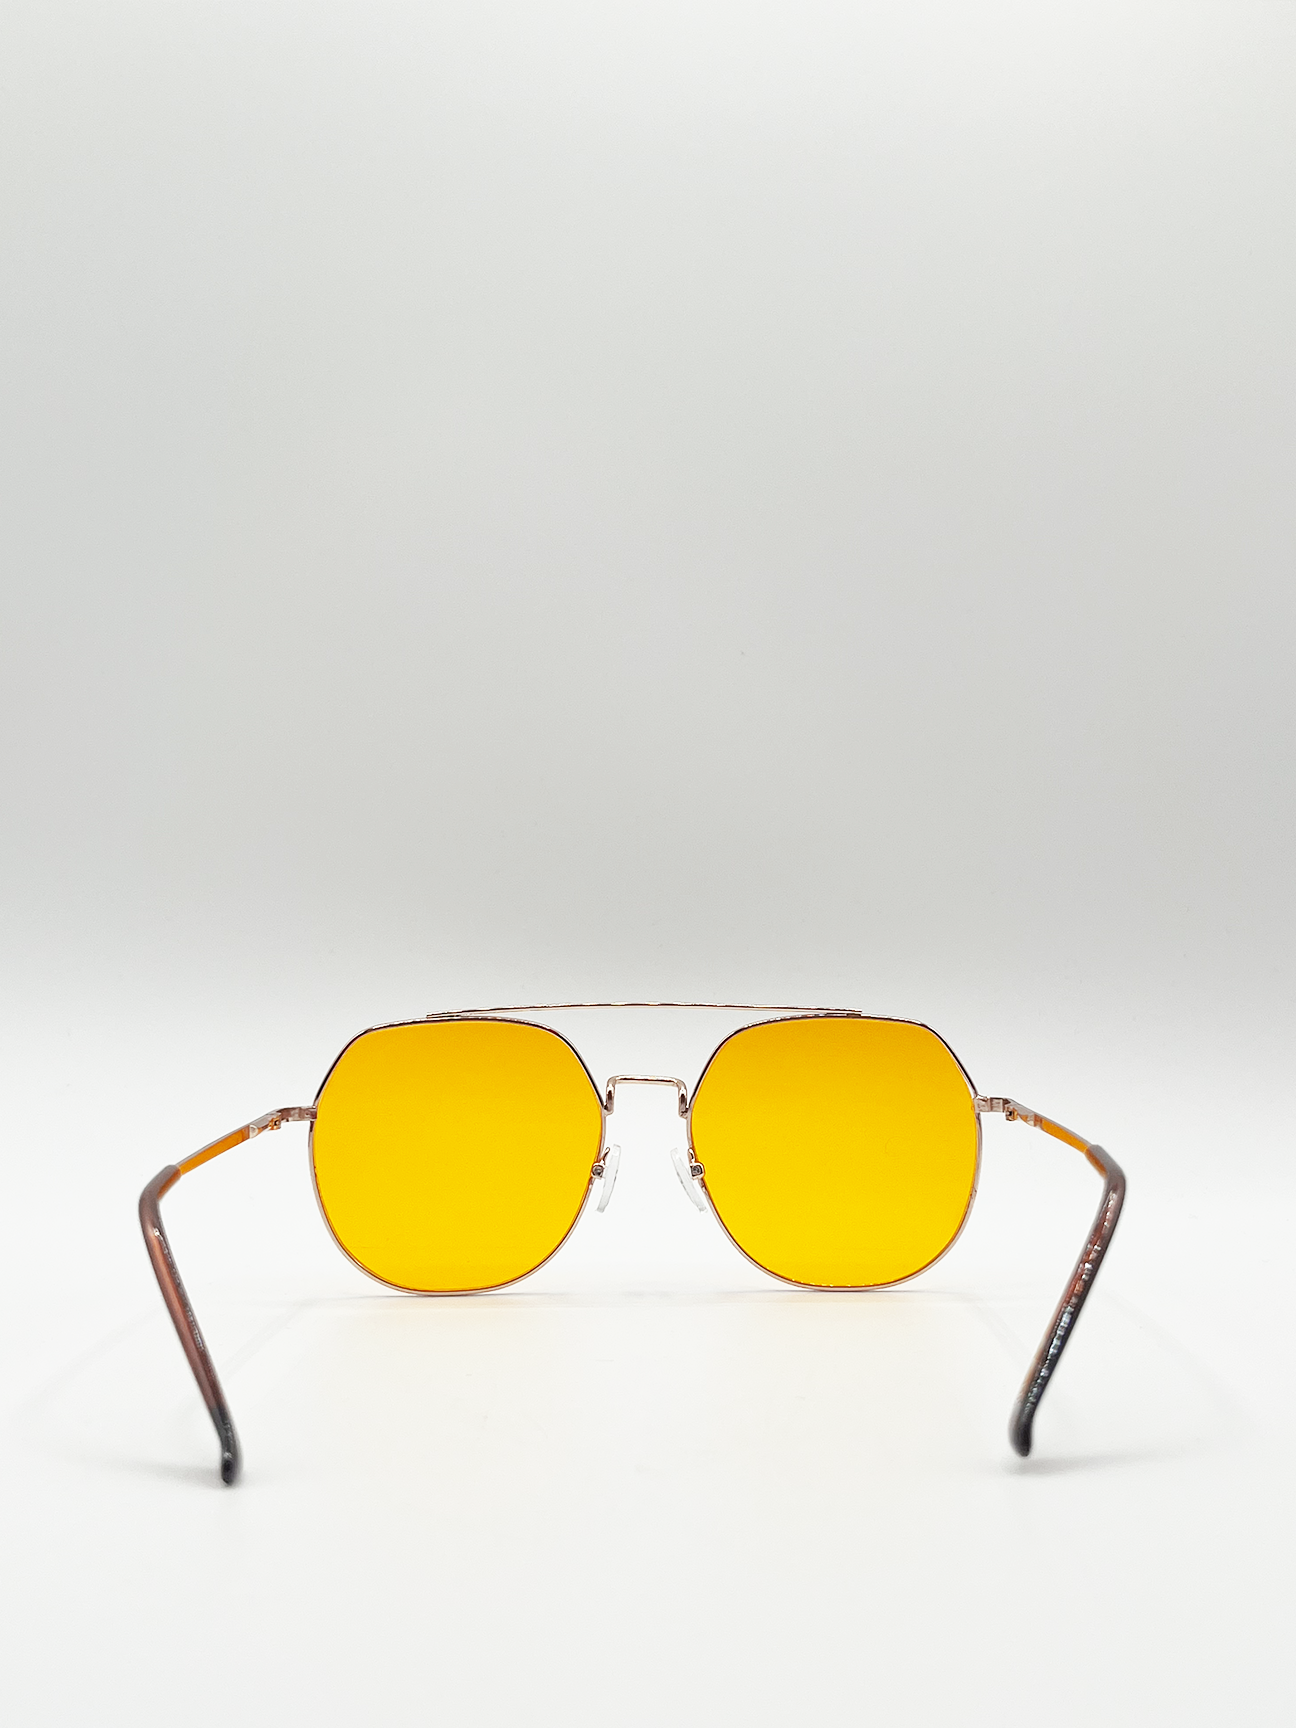 Oversized Aviator Style Sunglasses with Yellow Lenses